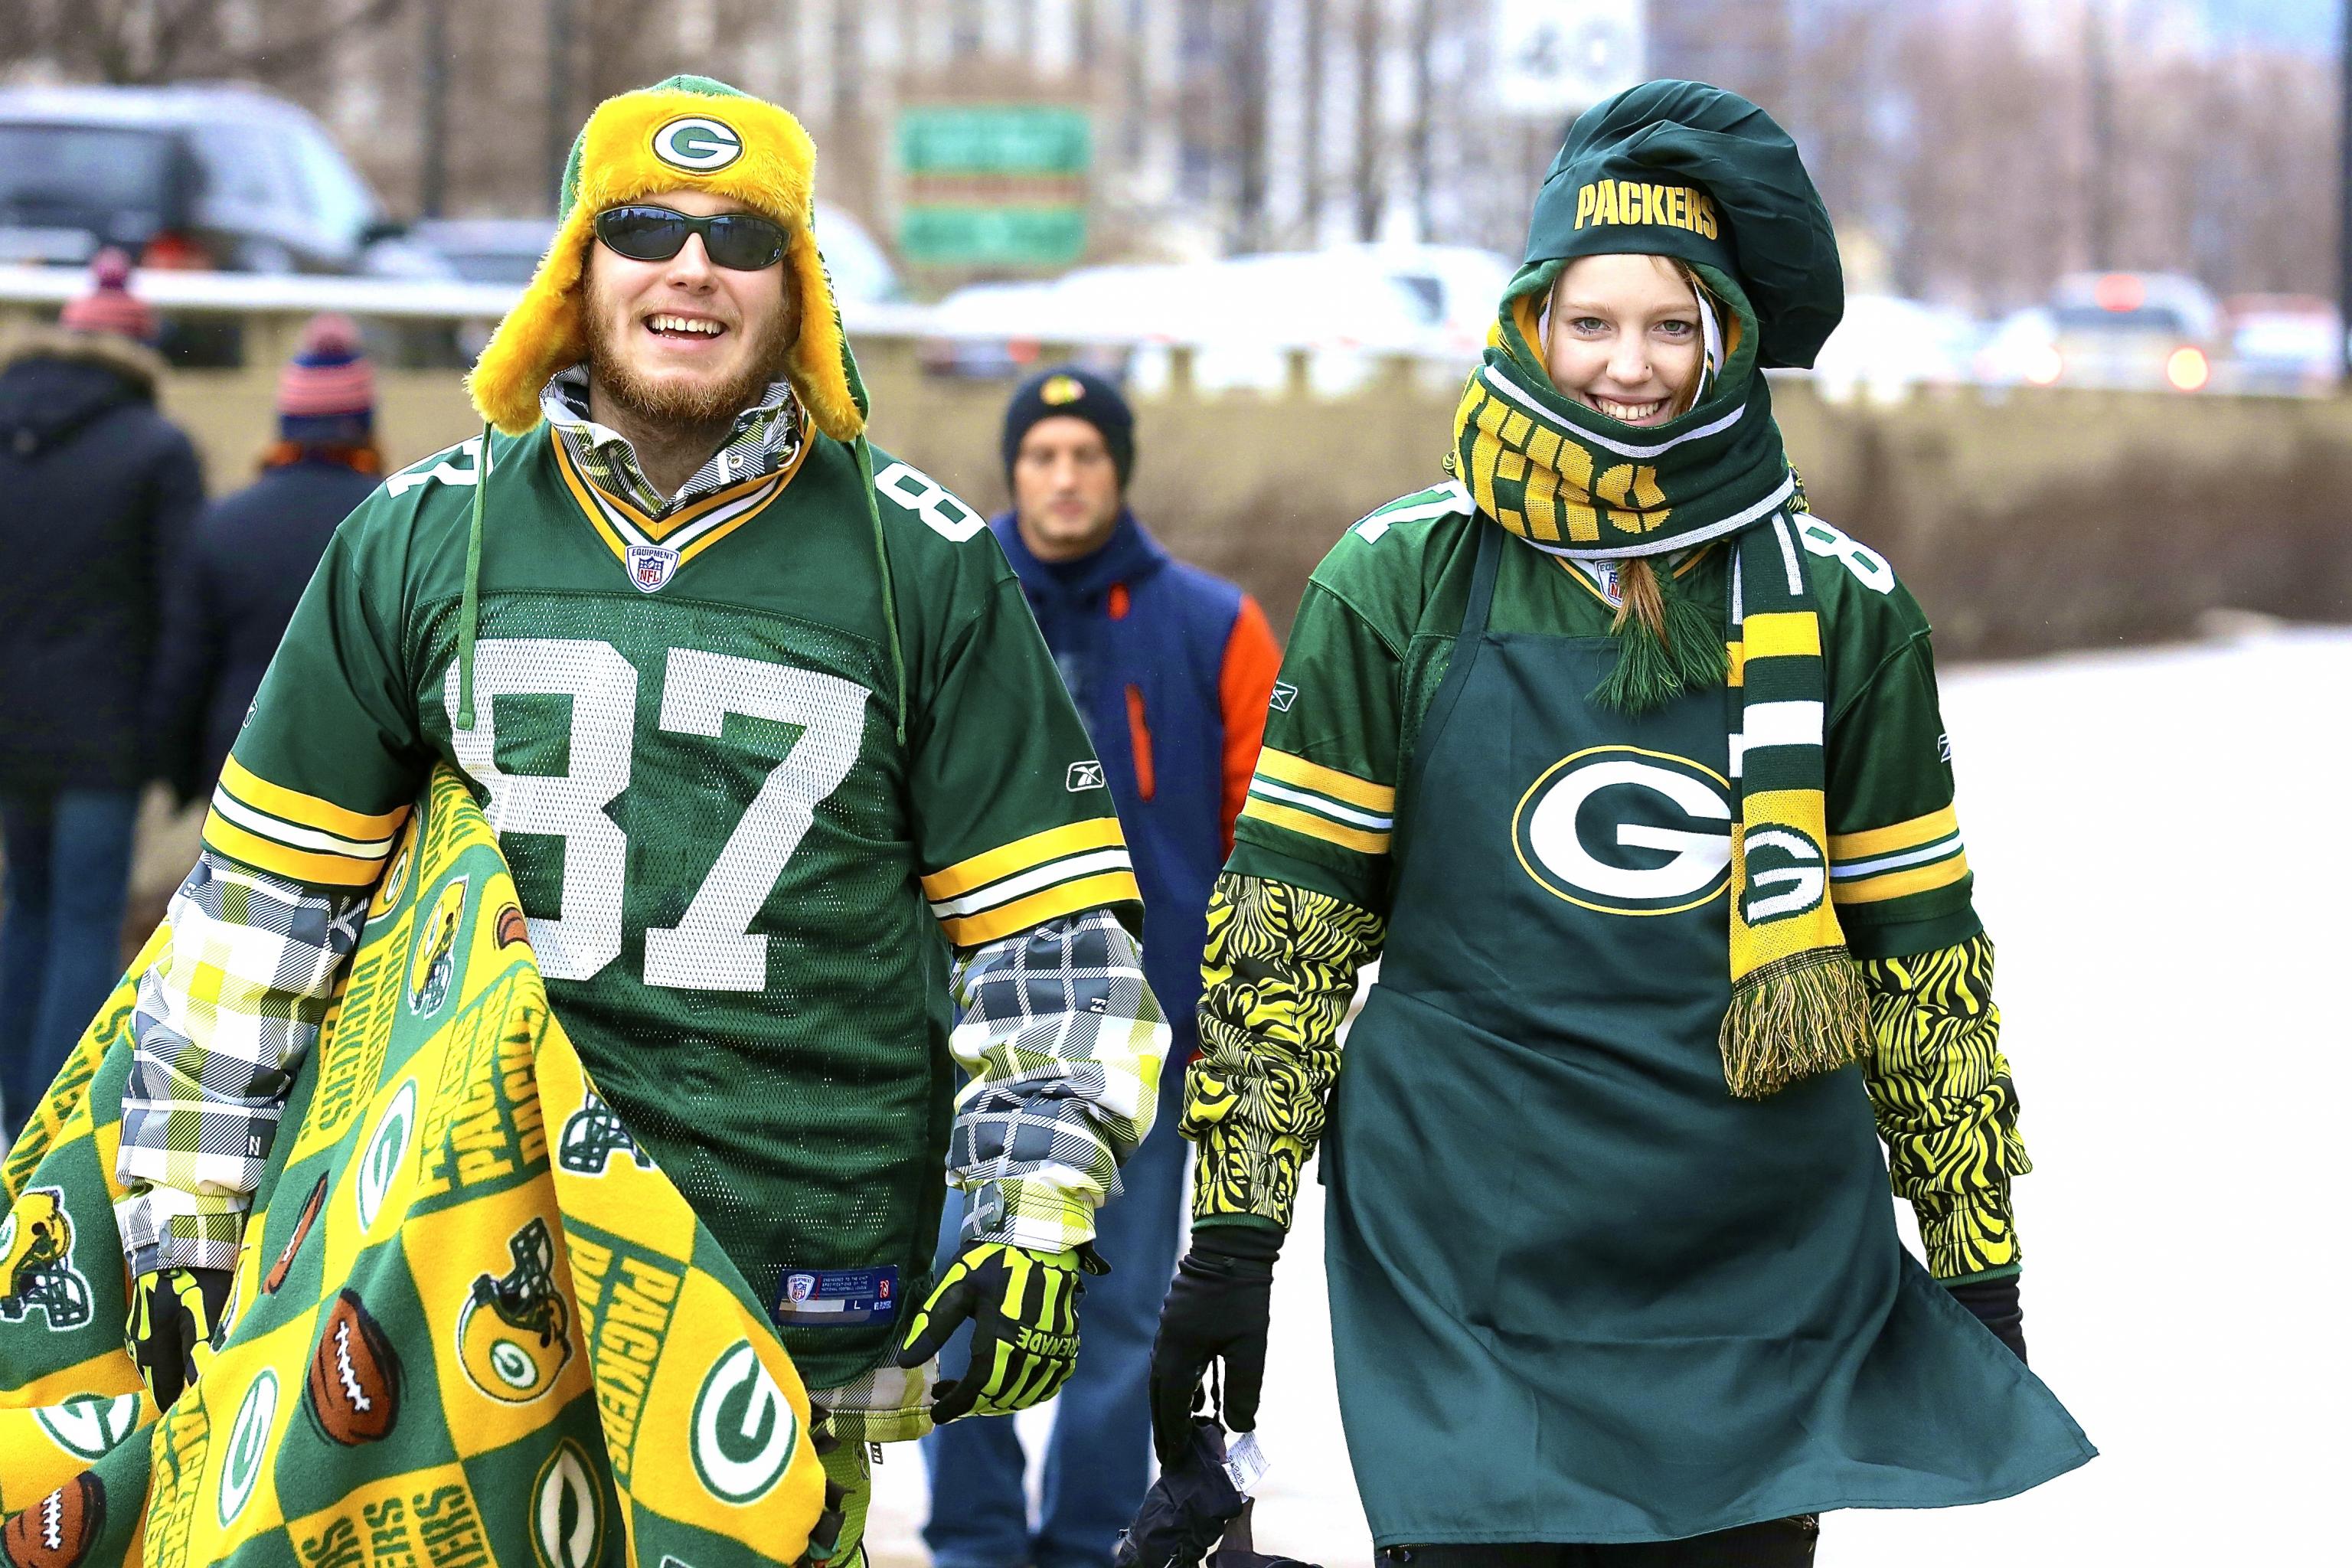 packers backers dating site)